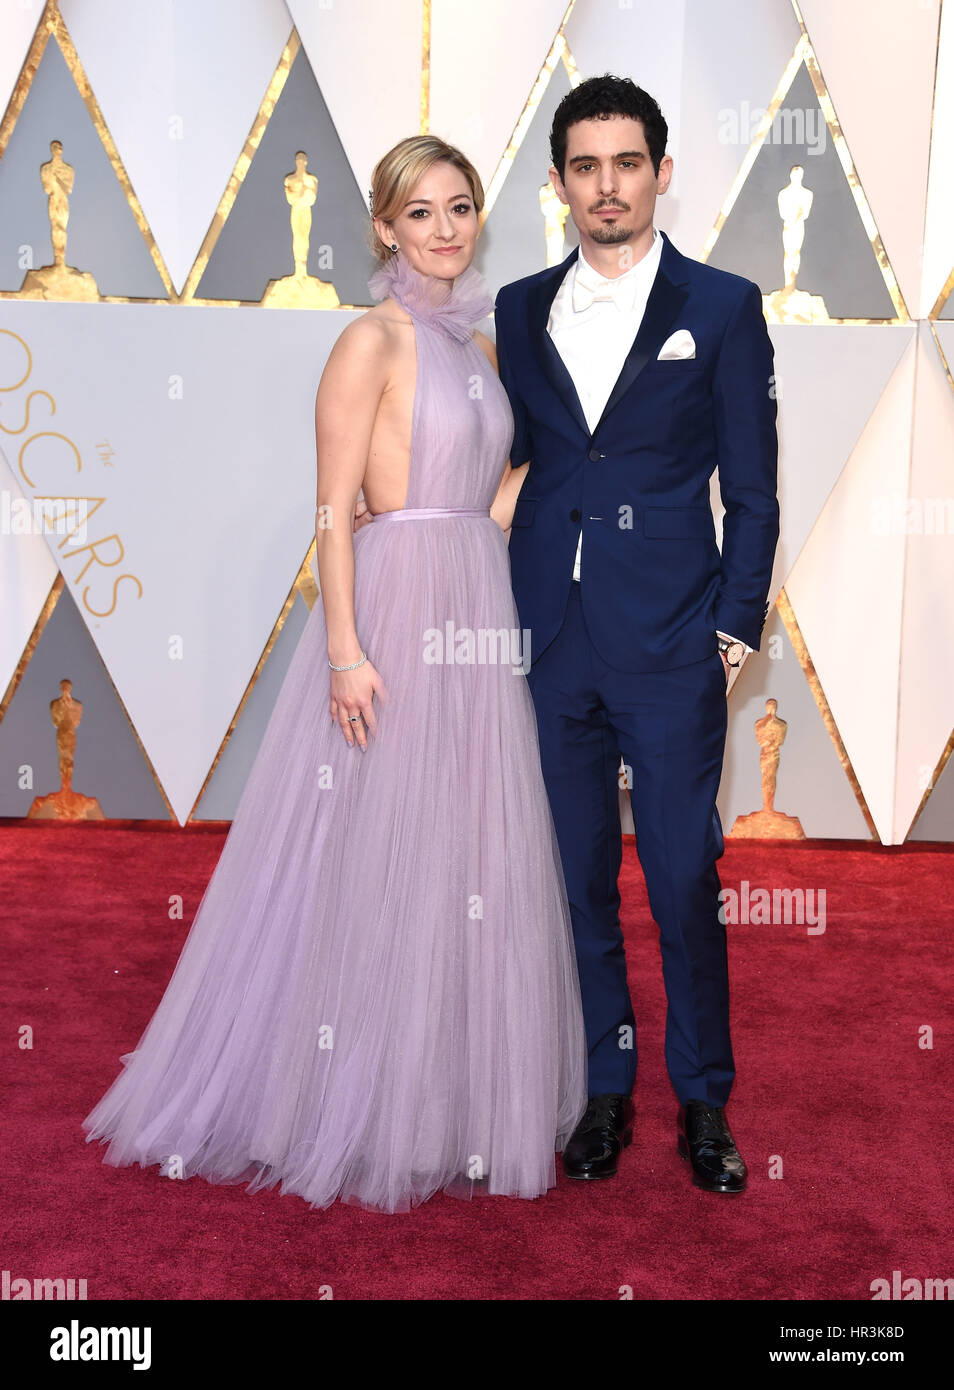 Hollywood, California, USA. 26th Feb, 2017. DAMIEN CHAZELLE during red carpet arrivals for the 89th Academy Awards ceremony. Credit: Lisa O'Connor/ZUMA Wire/Alamy Live News Stock Photo